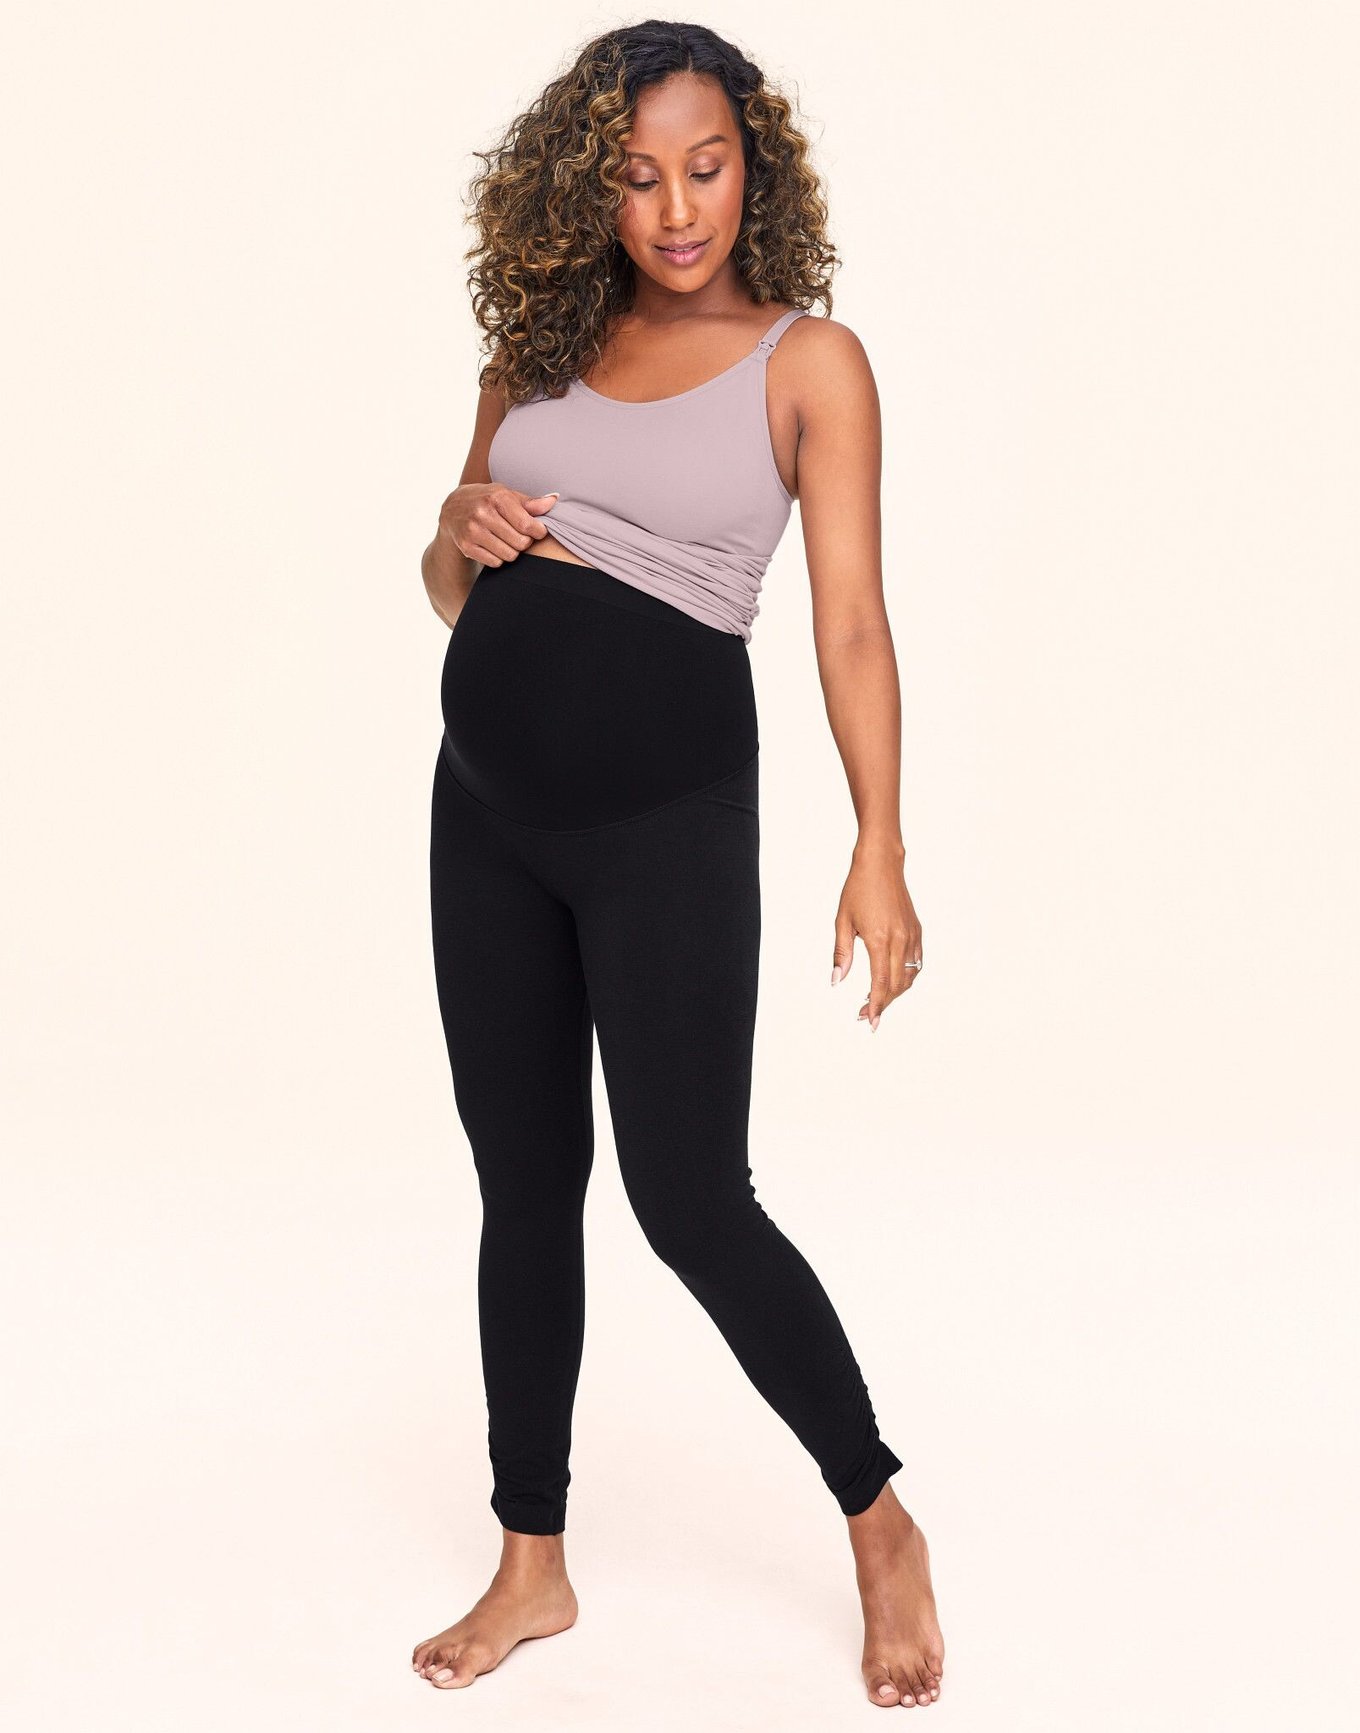 BLANQI Black Sport Support Hipster Contour Maternity Leggings Size